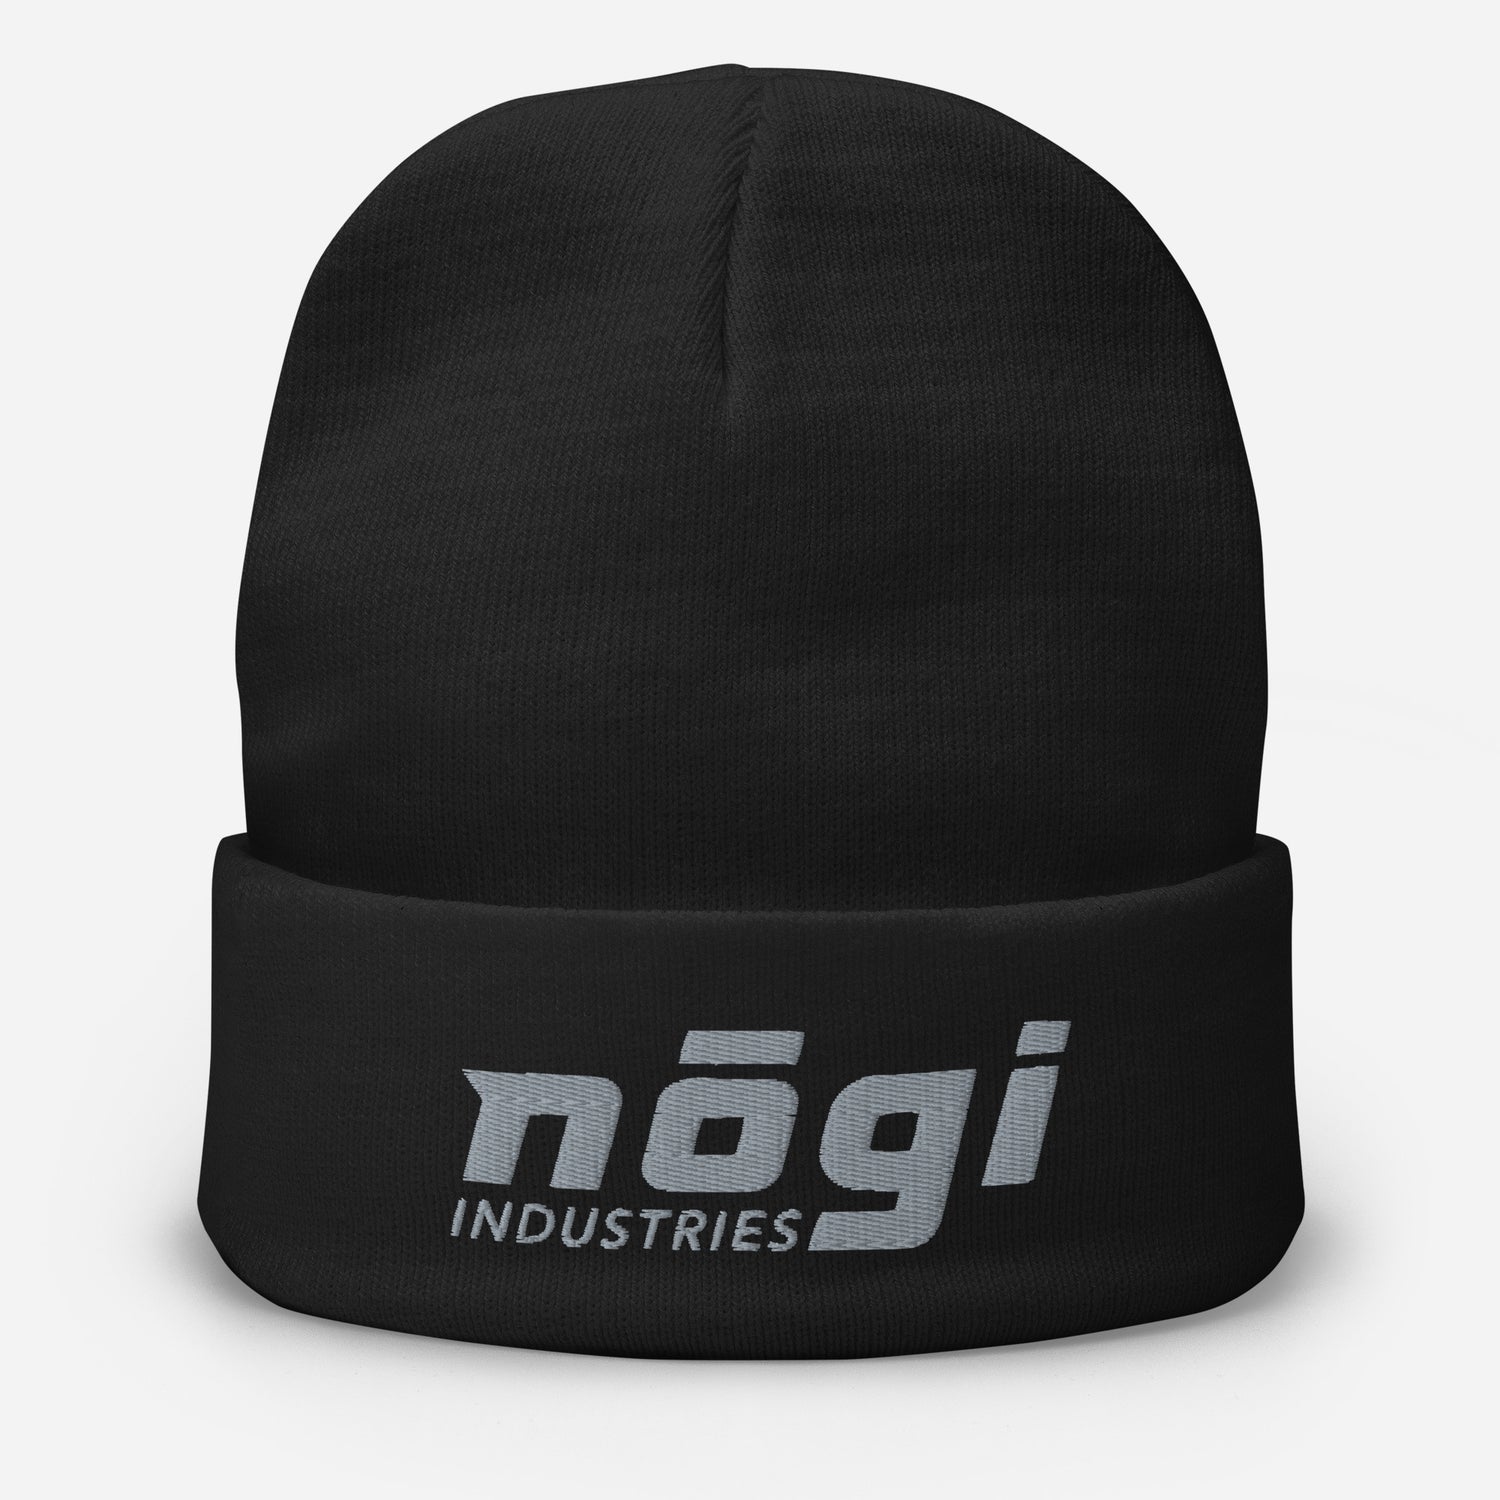 Embroidered Beanie w Puff logo (Black & Gray) by Nogi Industries